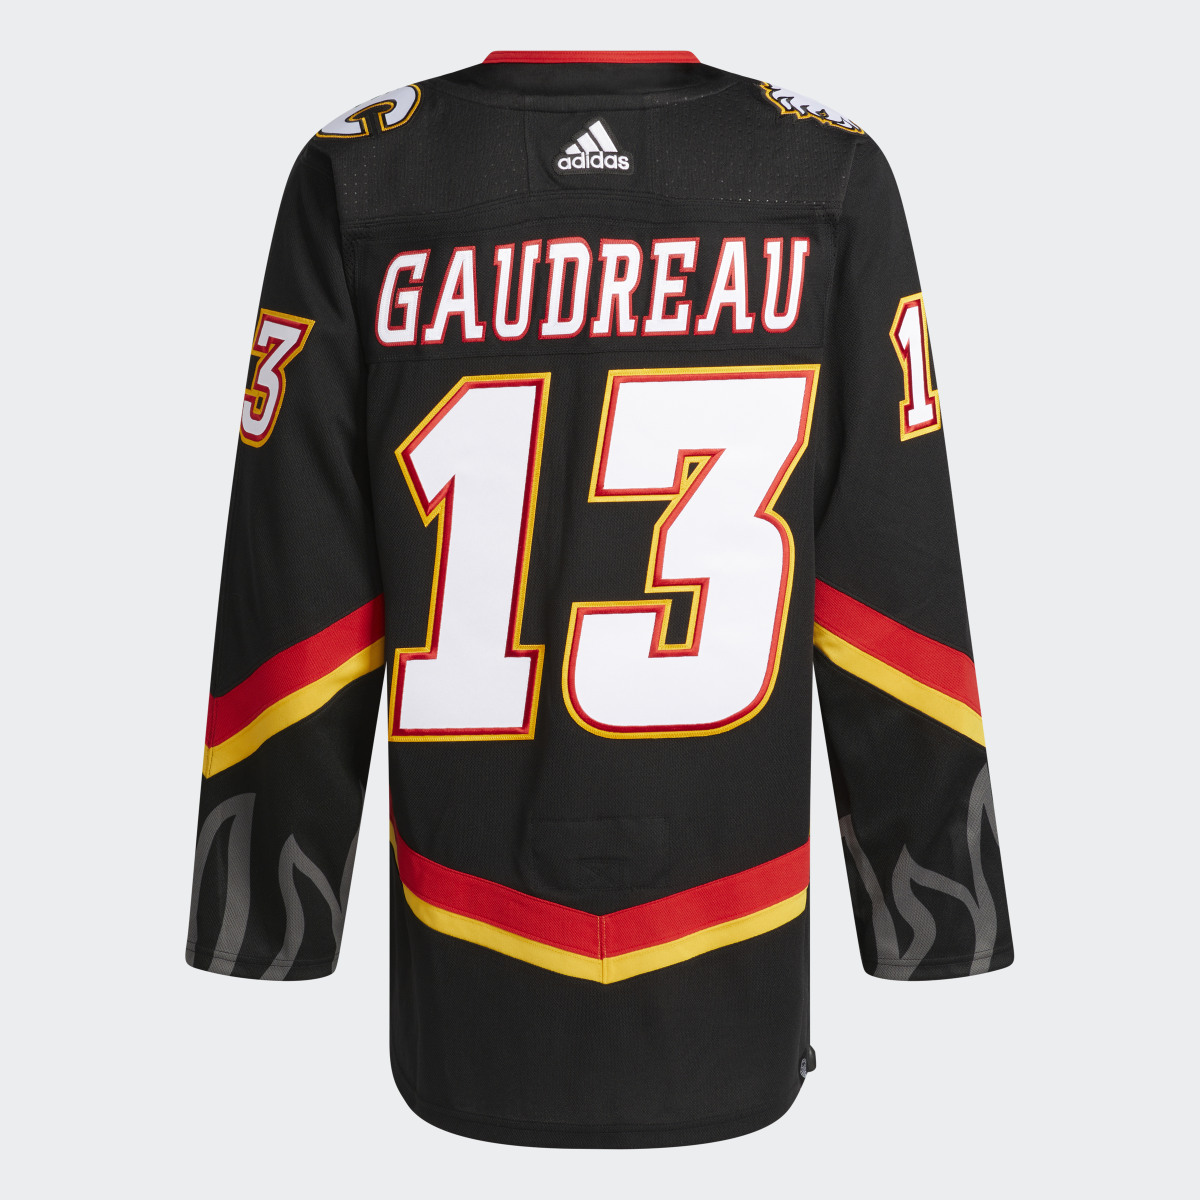 Adidas Flames Gaudreau Third Authentic Jersey. 6